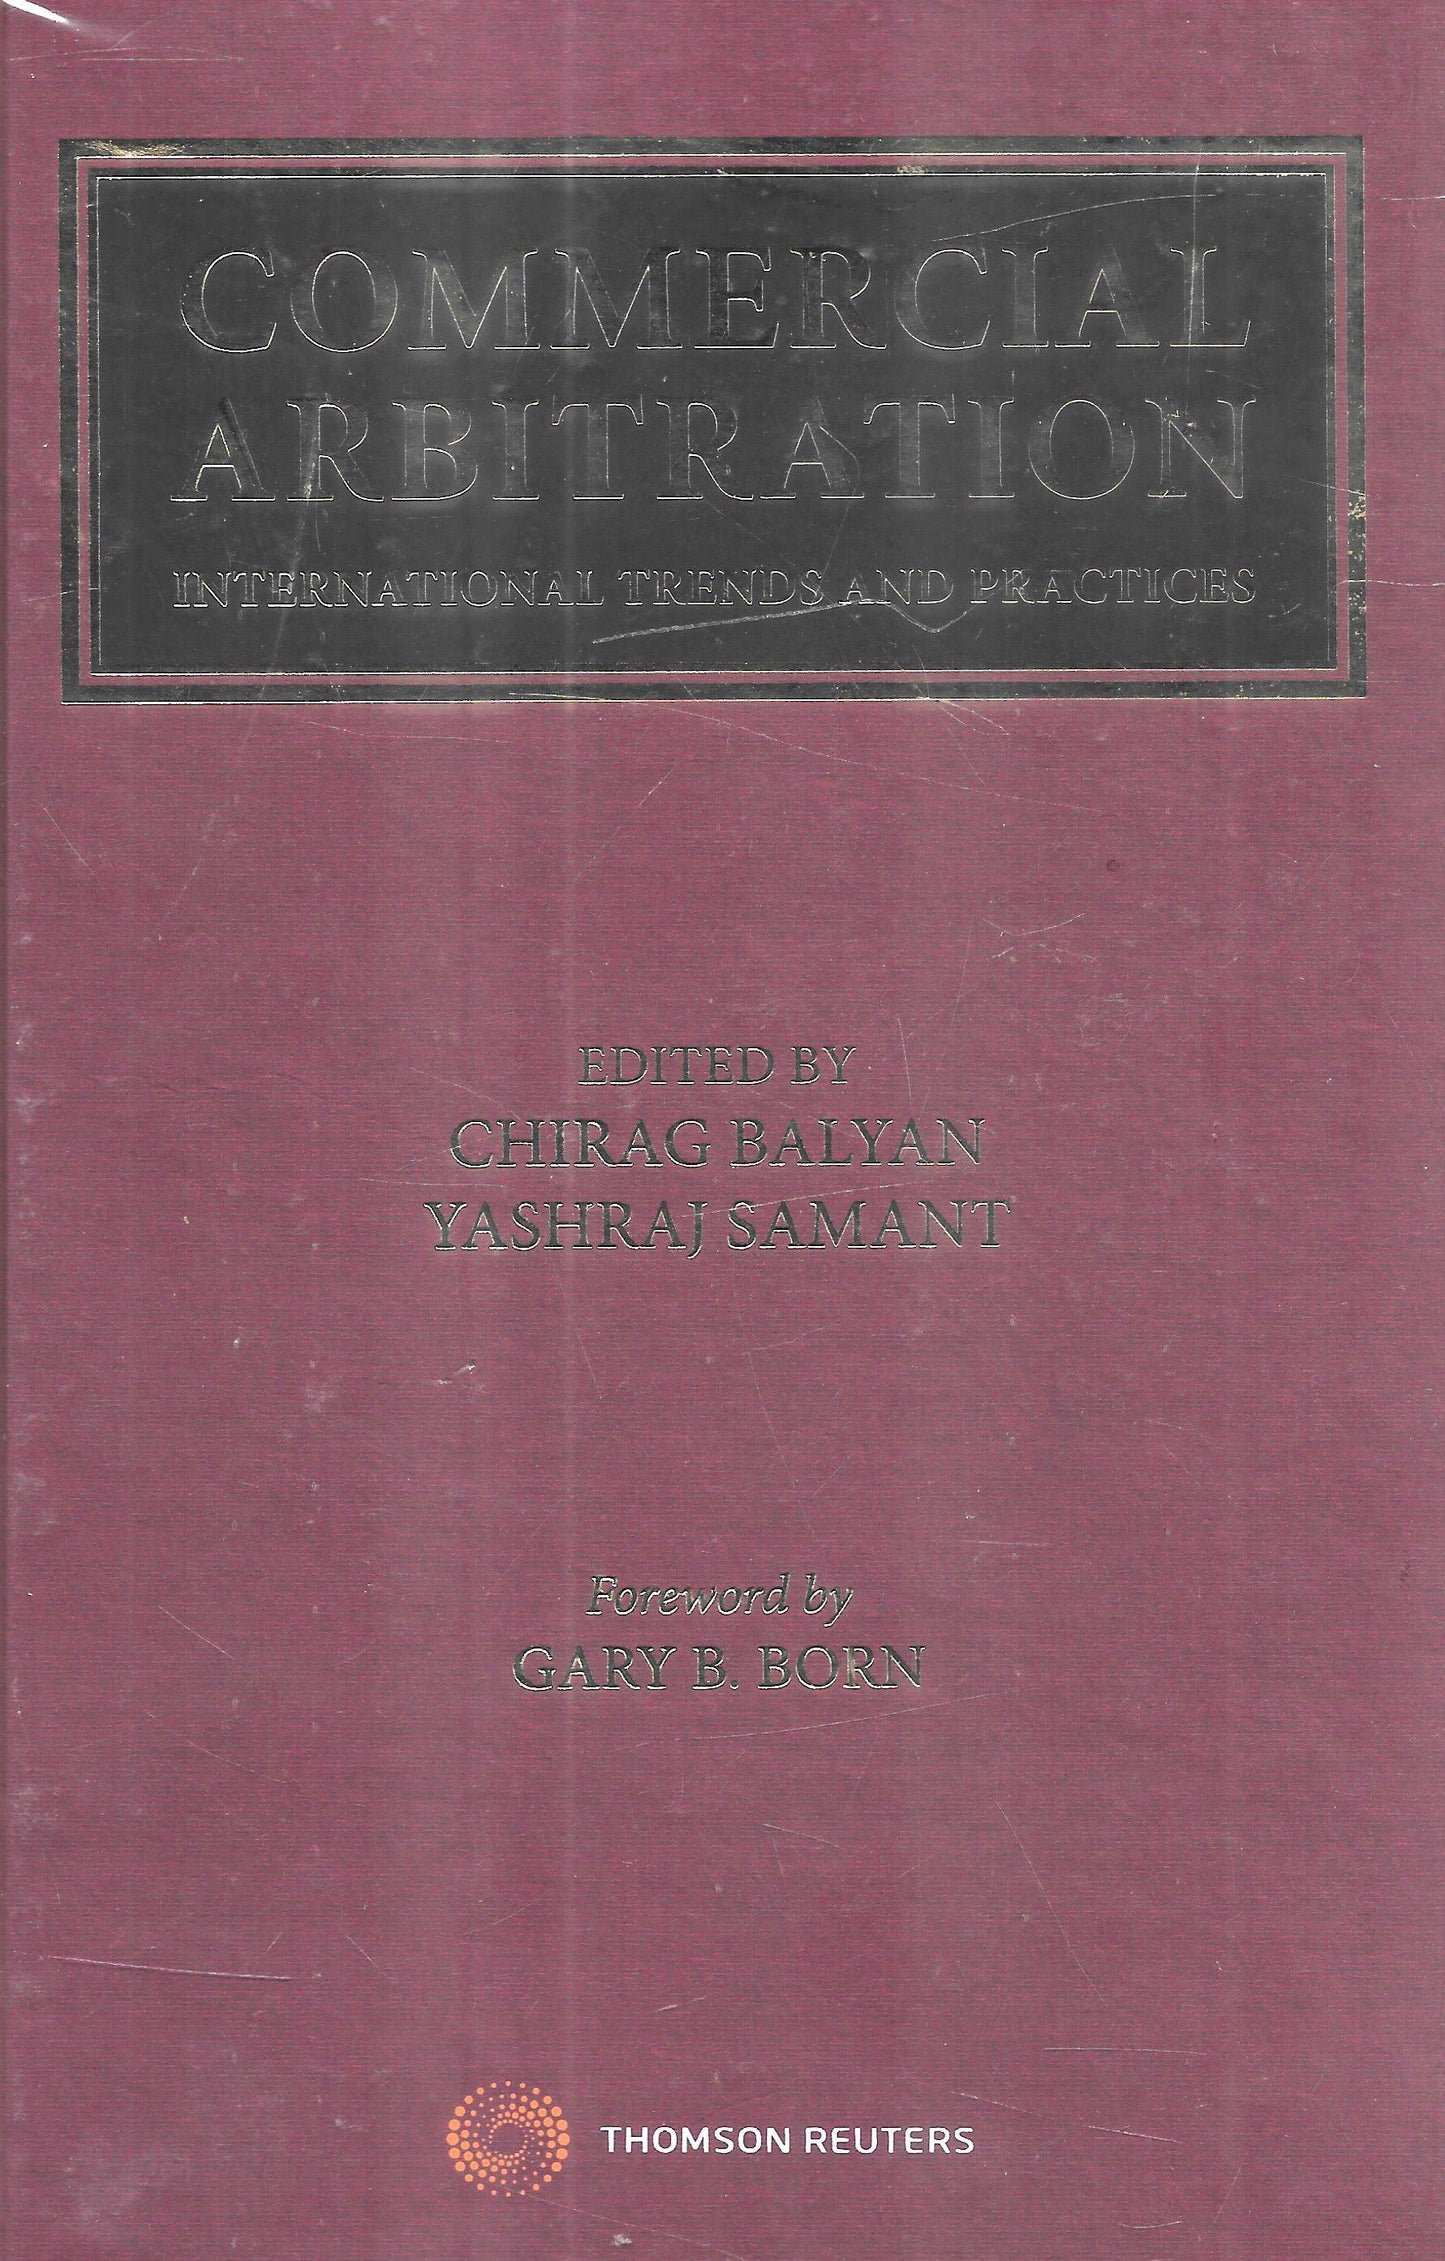 Commercial Arbitration – International Trends and Practices